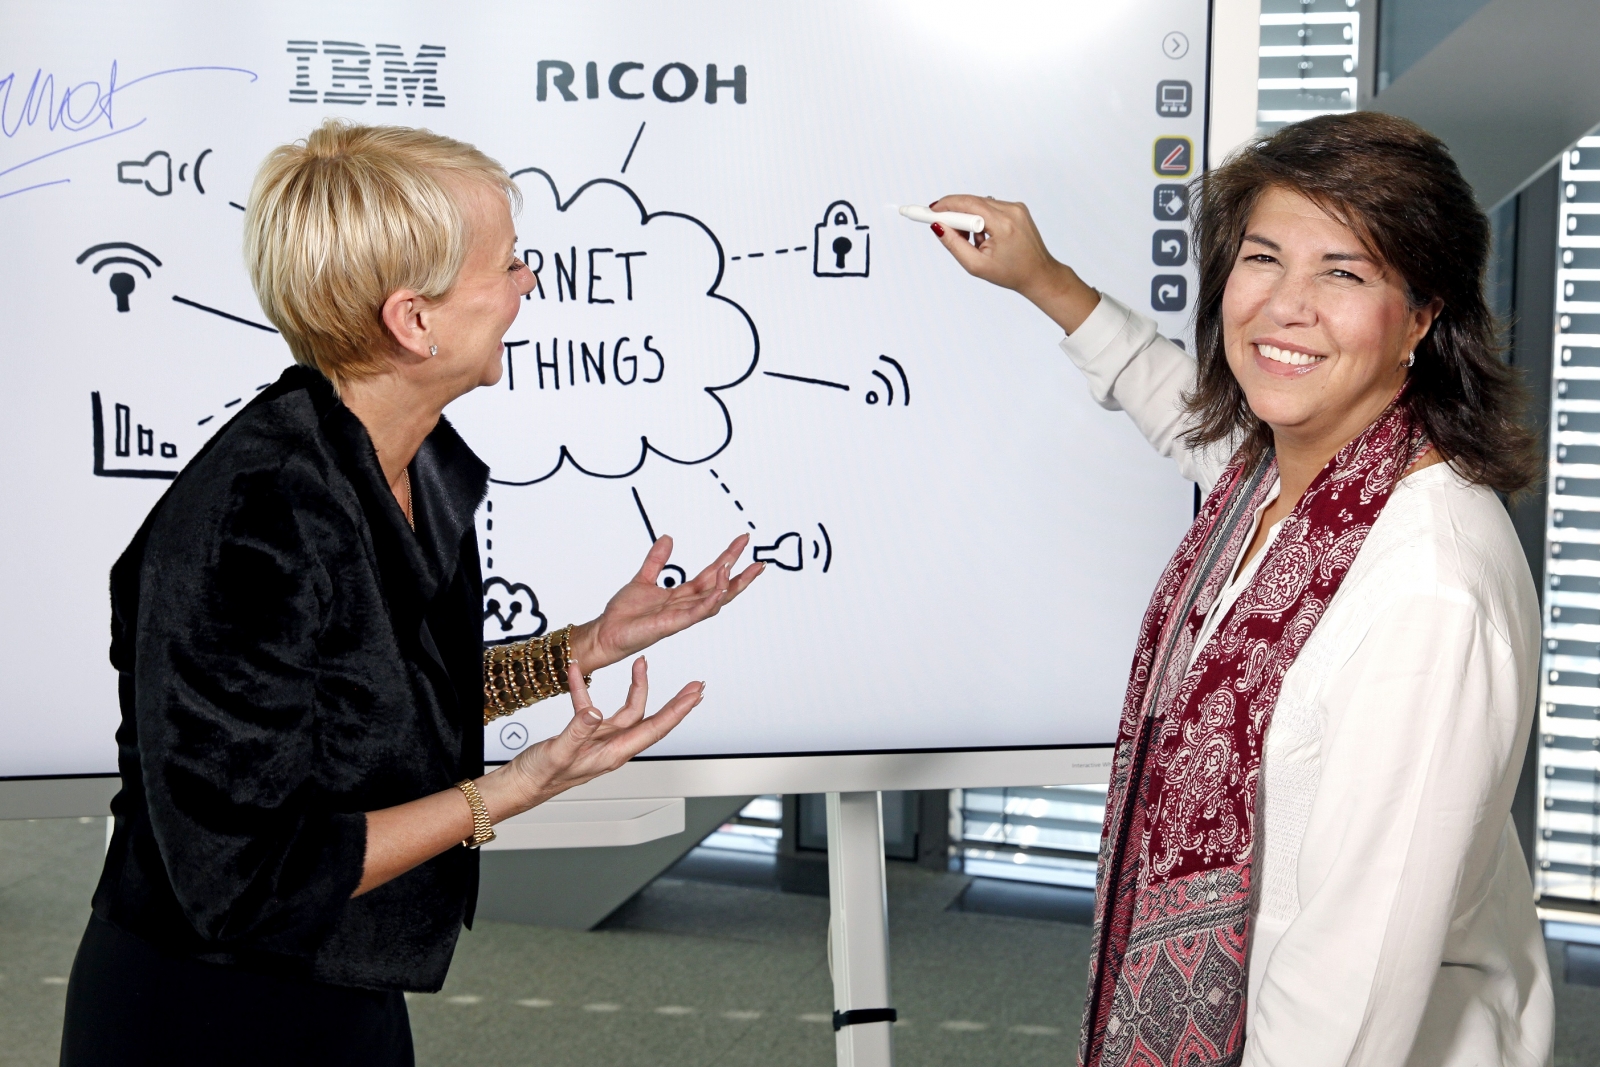 IBM and Ricoh develop a smart whiteboard